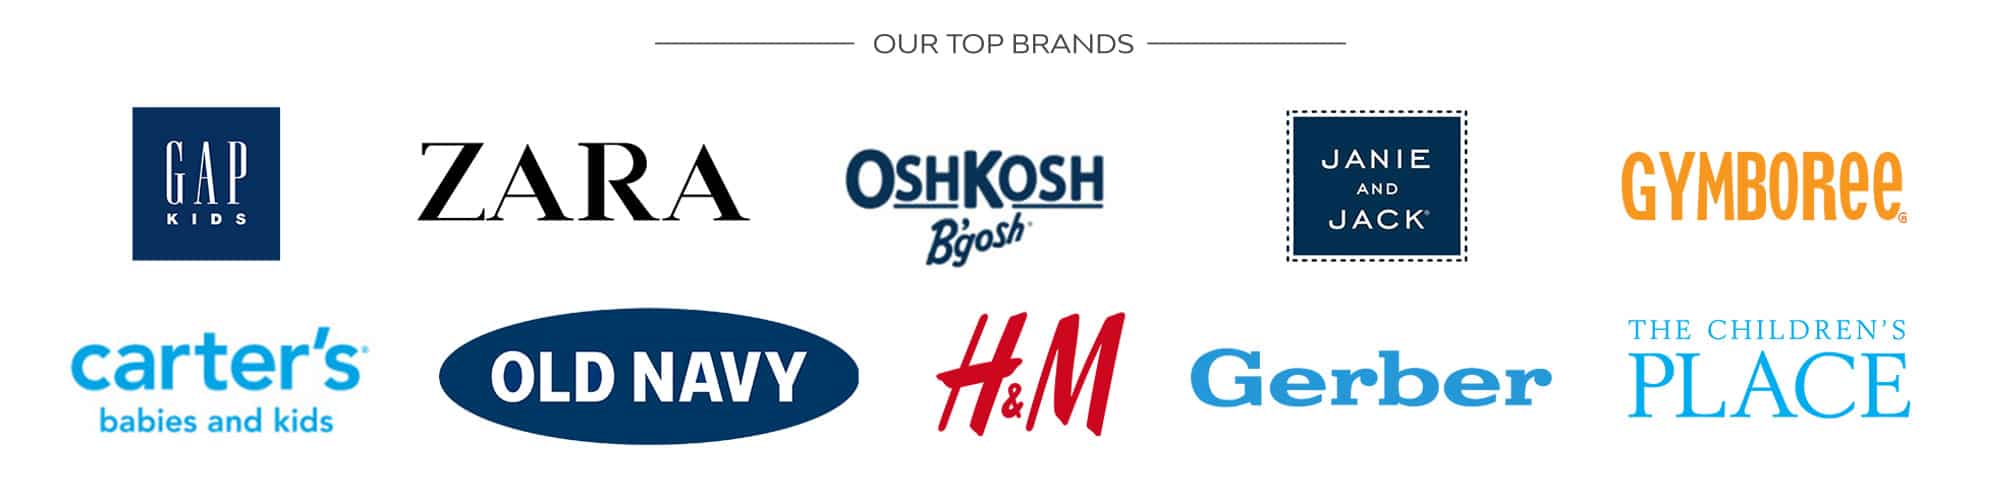 Our Top Brands